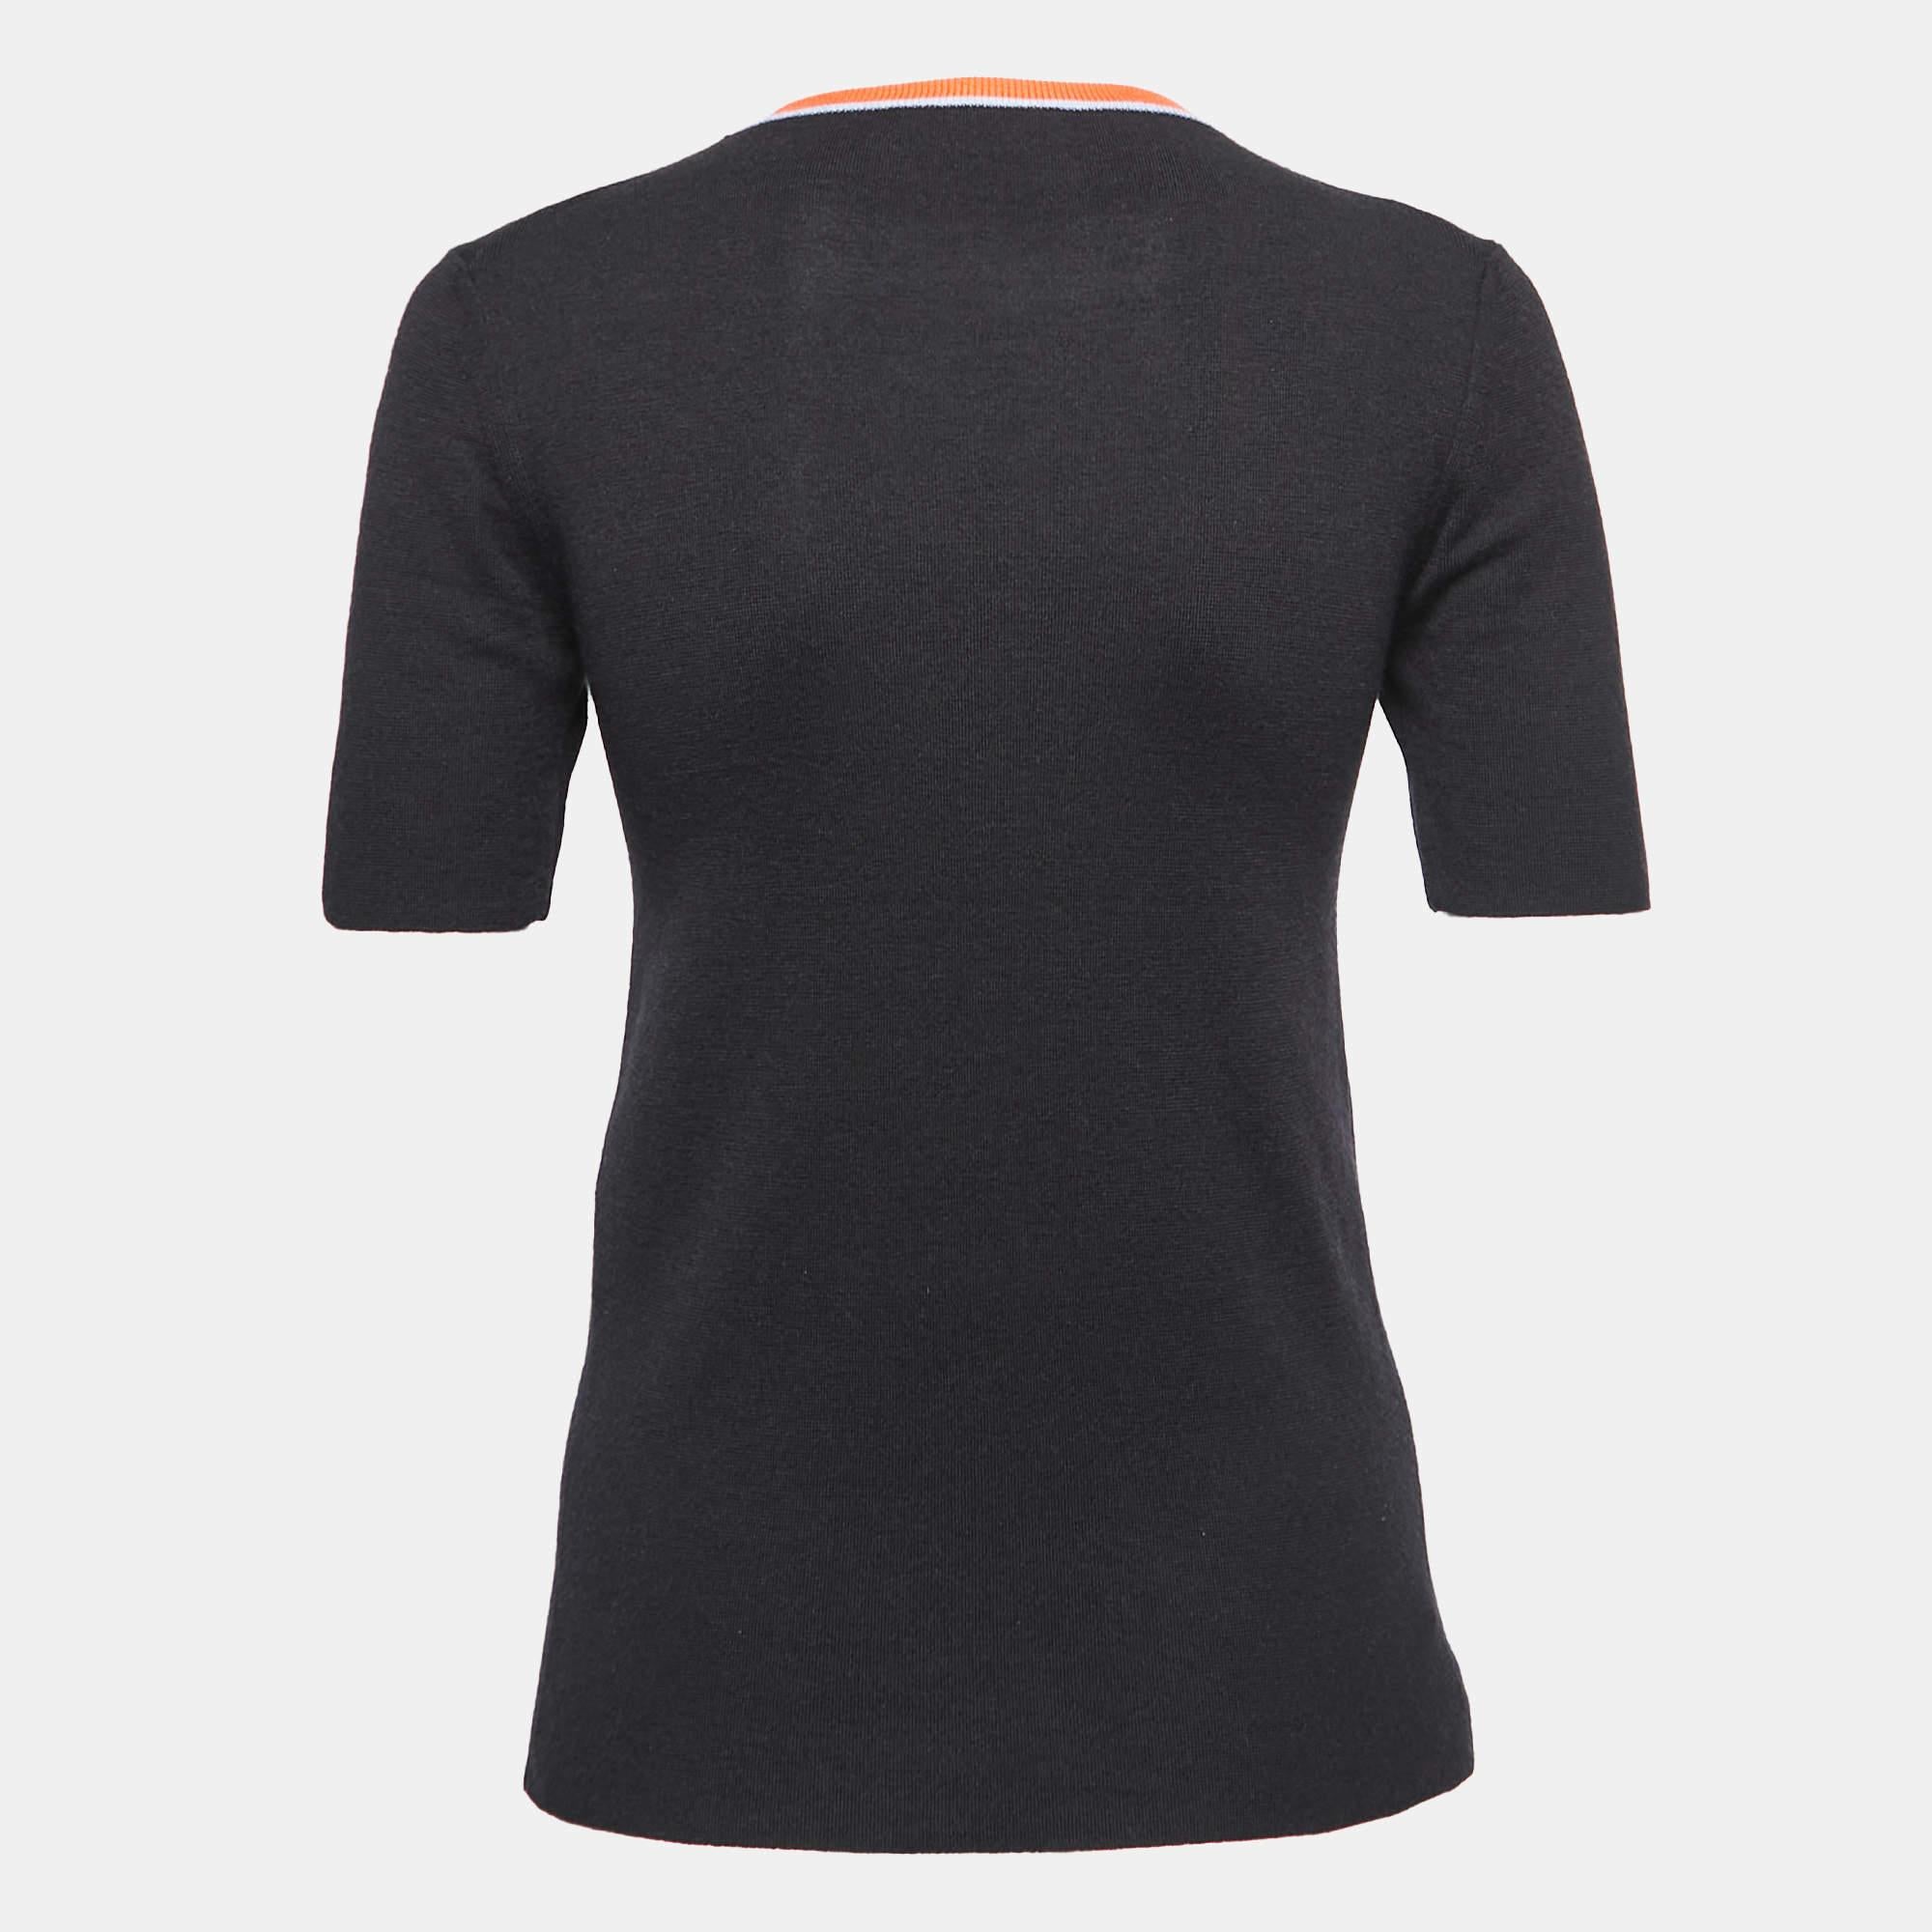 Louis Vuitton brings you this simple yet chic top in black. Made from a cashmere blend, it has a round neckline, short sleeves, and embellishments on the front. Wear this top tucked into a comfy pair of jeans or a skirt for an effortless look.

